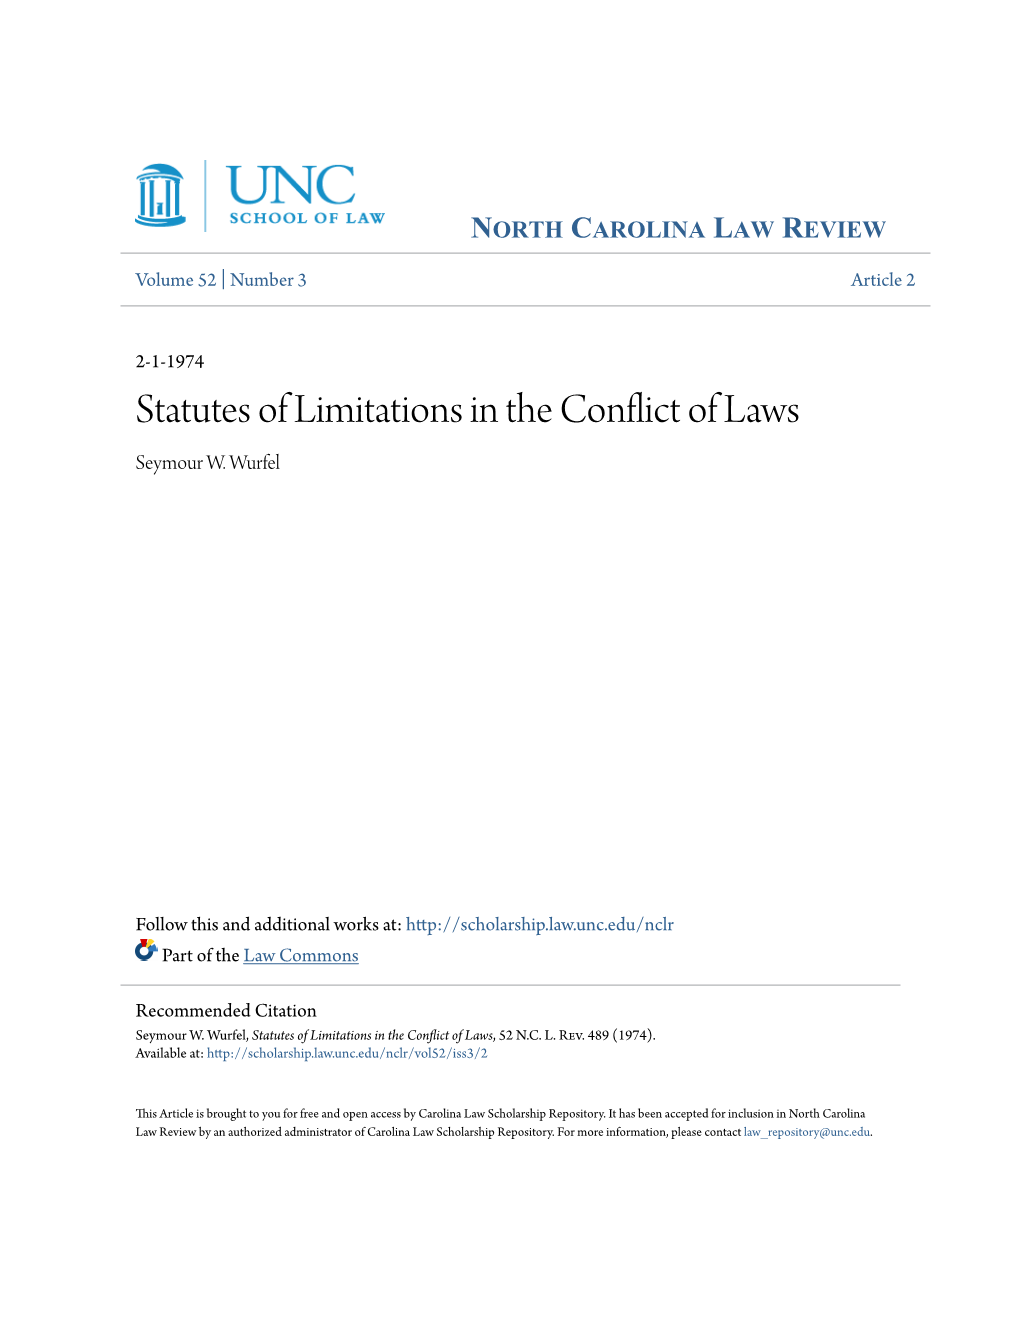 Statutes of Limitations in the Conflict of Laws Seymour W